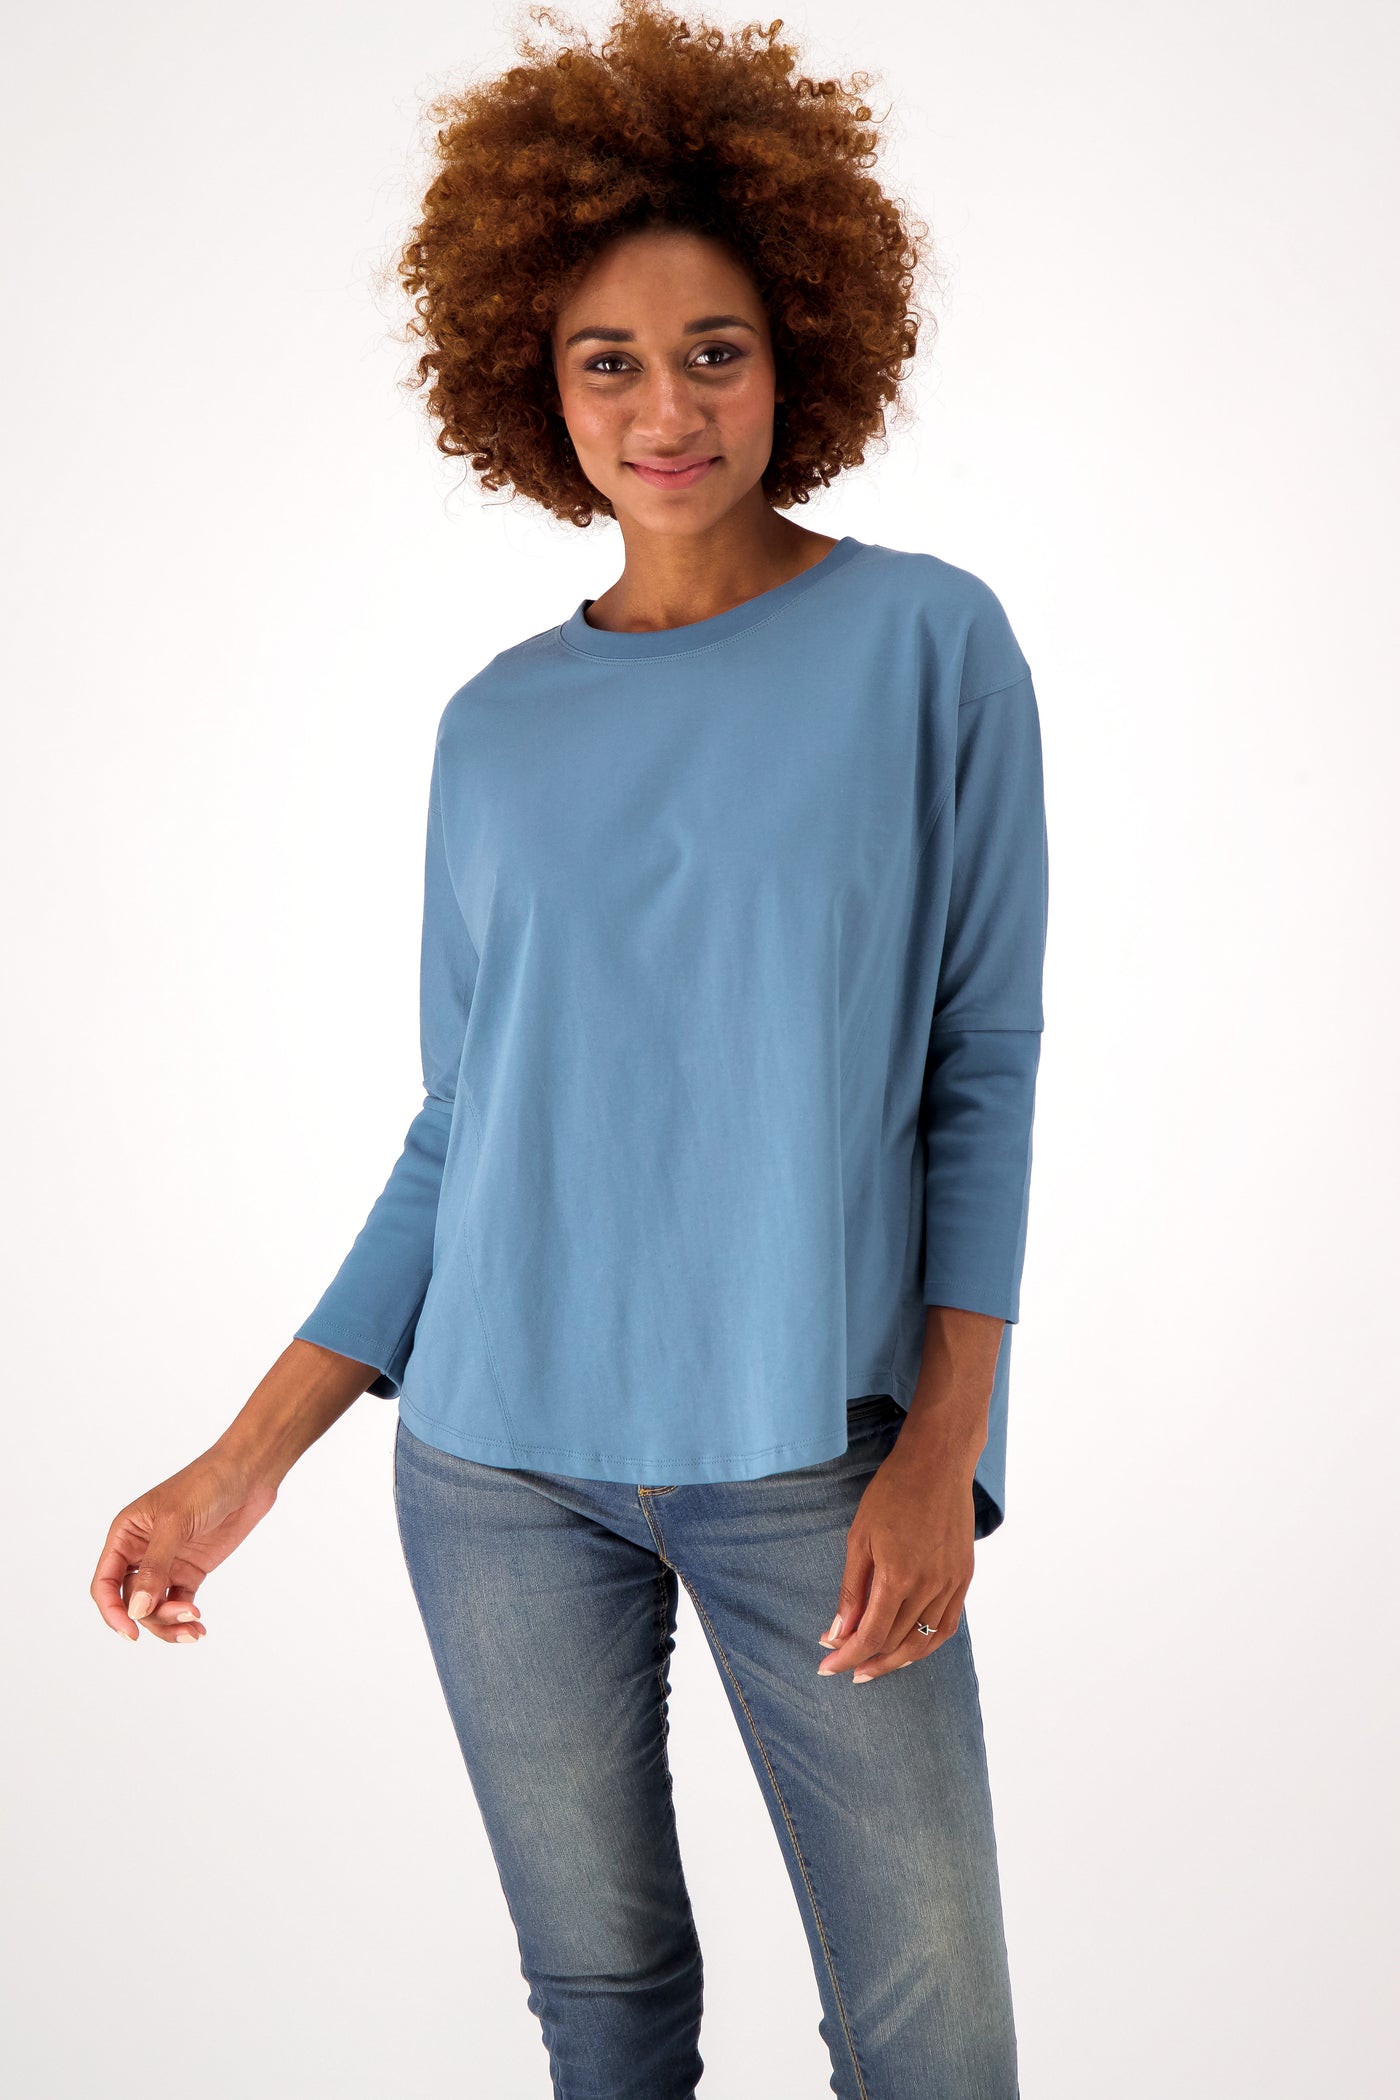 Batwing Sleeve Shirt for Women | 100% Organic Cotton Clothing – The ...